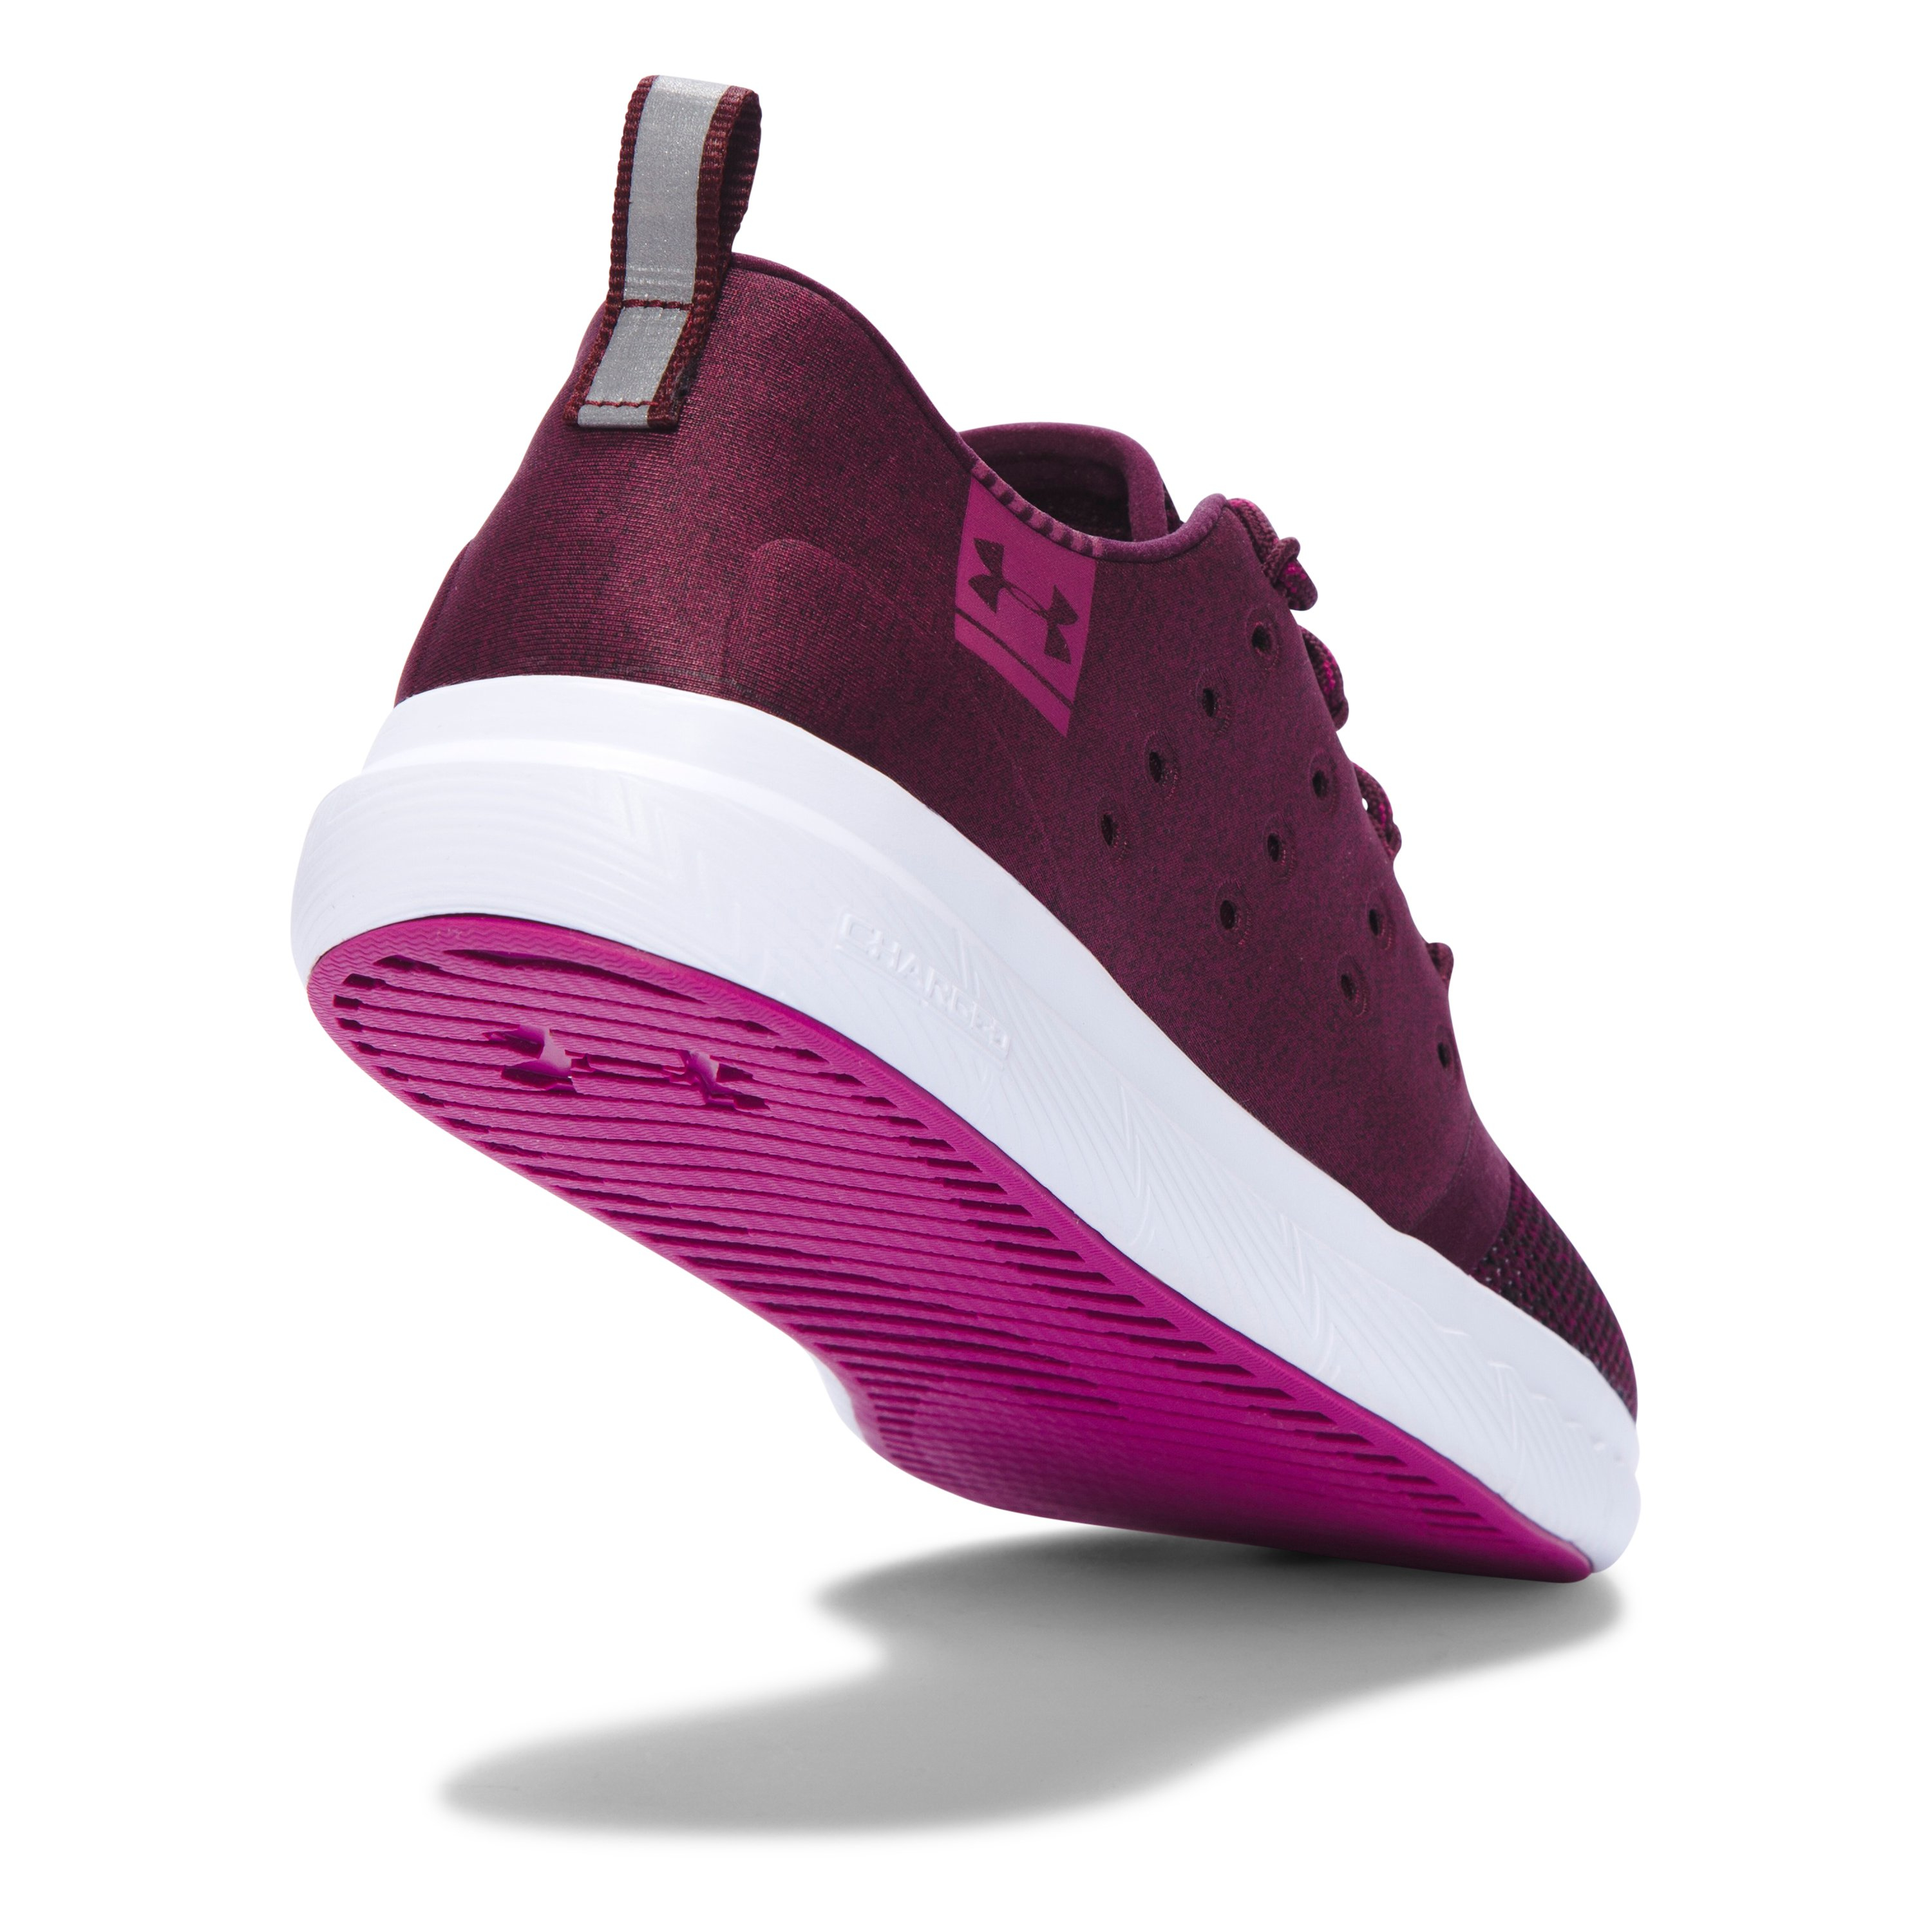 Under Armour Women's Ua Charged 24/7 Low Running Shoes | Lyst